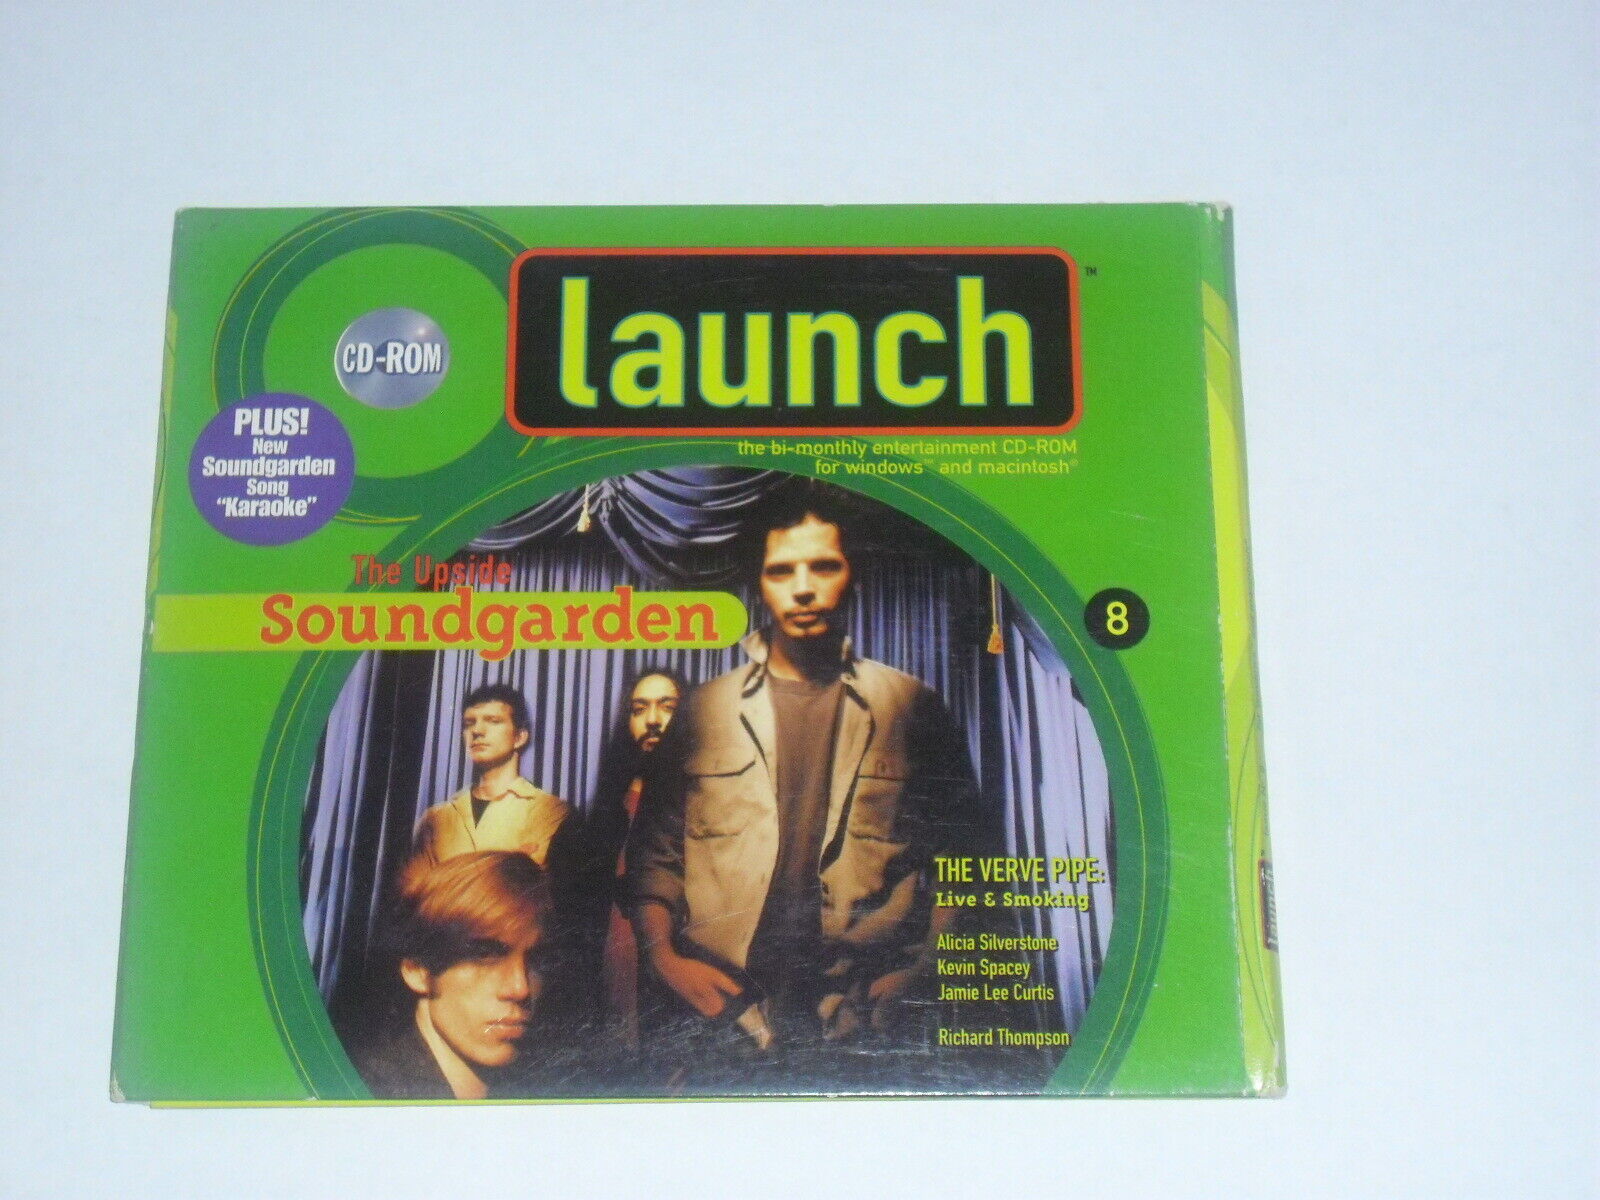 Vintage, 1996, Launch 8 Bi-Monthly entertainment CD-ROM, for Mac or Windows OS